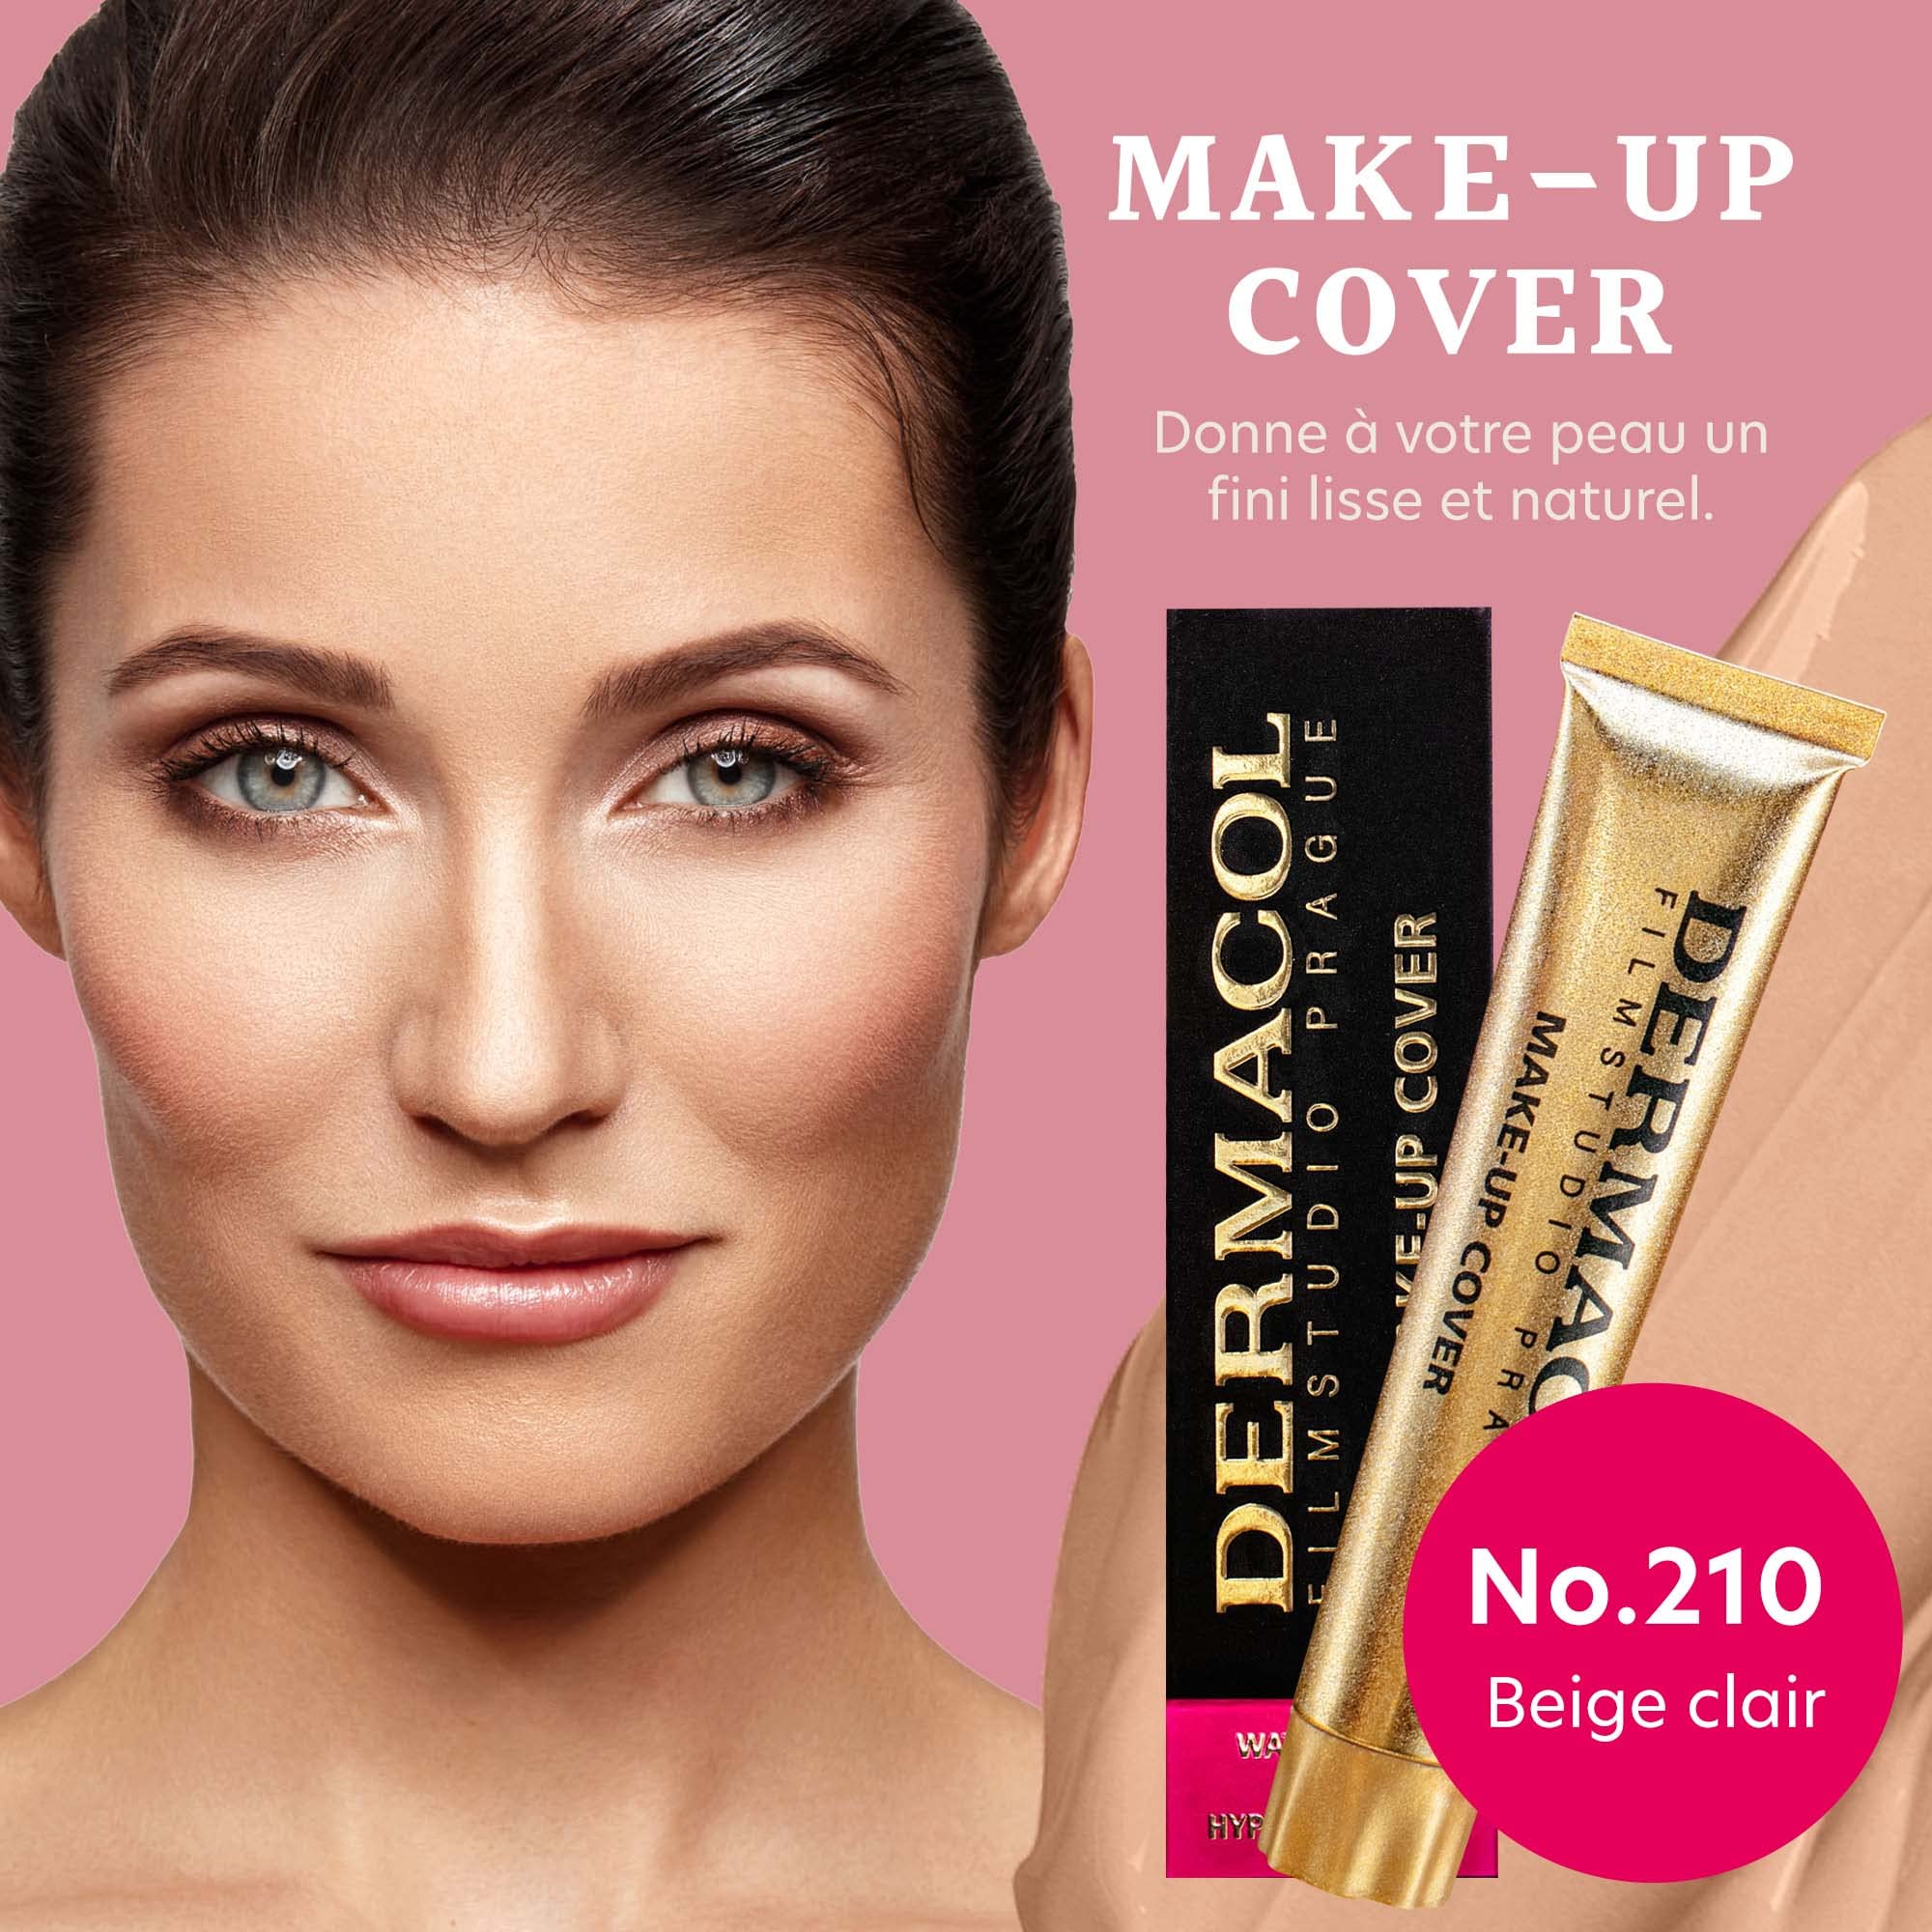 Dermacol - Full Coverage Foundation, Liquid Makeup Matte Foundation with SPF 30, Waterproof Foundation for Oily Skin, Acne, & Under Eye Bags, Long-Lasting Makeup Products, 30g, Shade 210